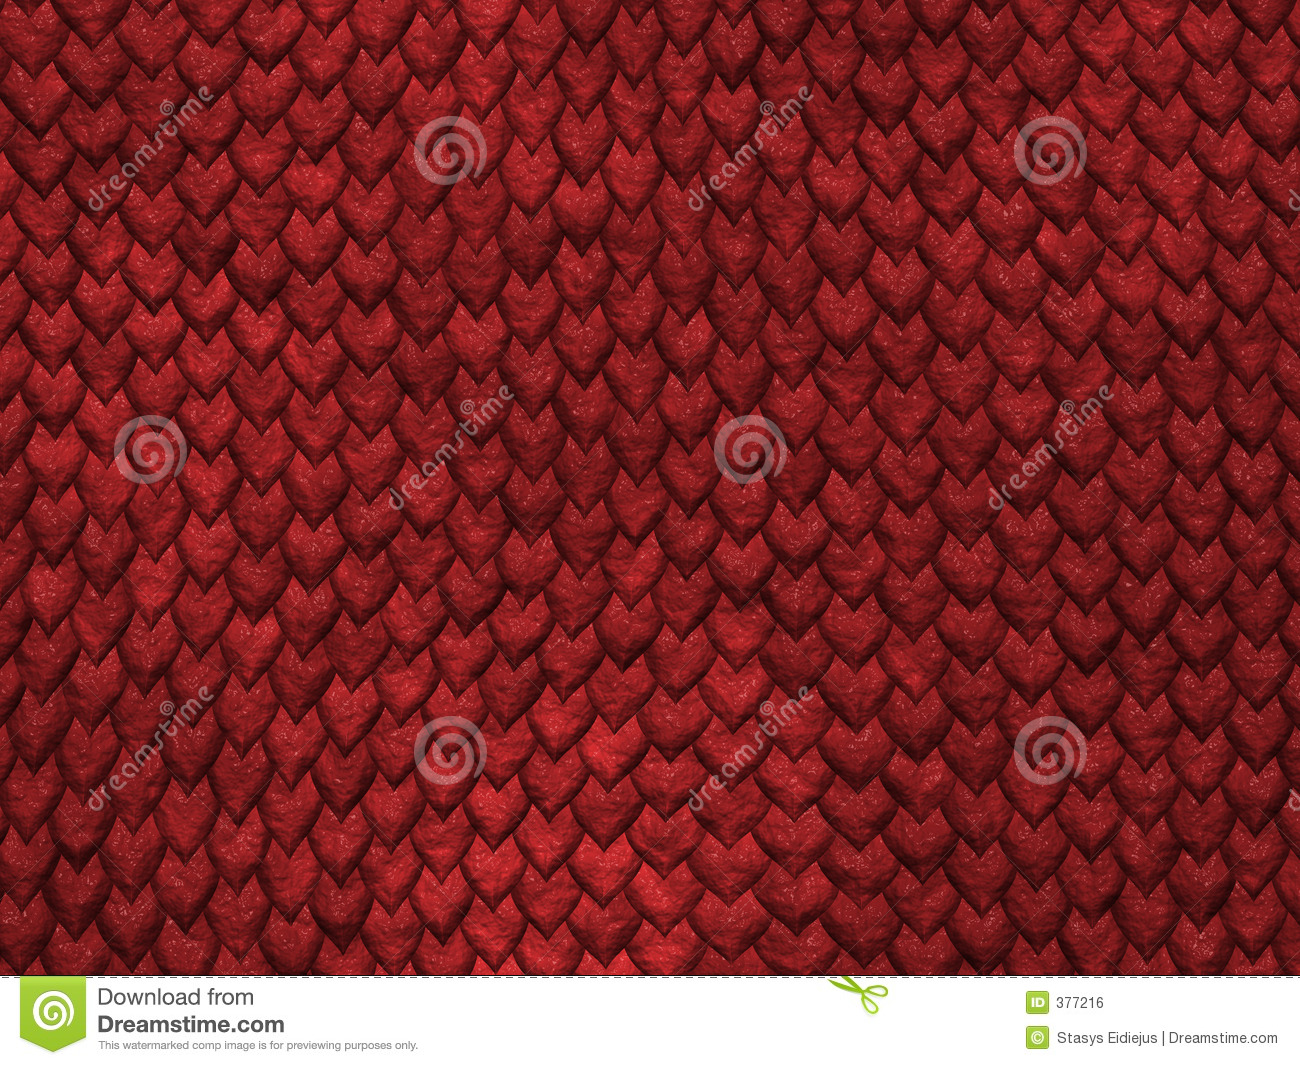 Reptile Texture   Red Scales Royalty Free Stock Image   Image  377216